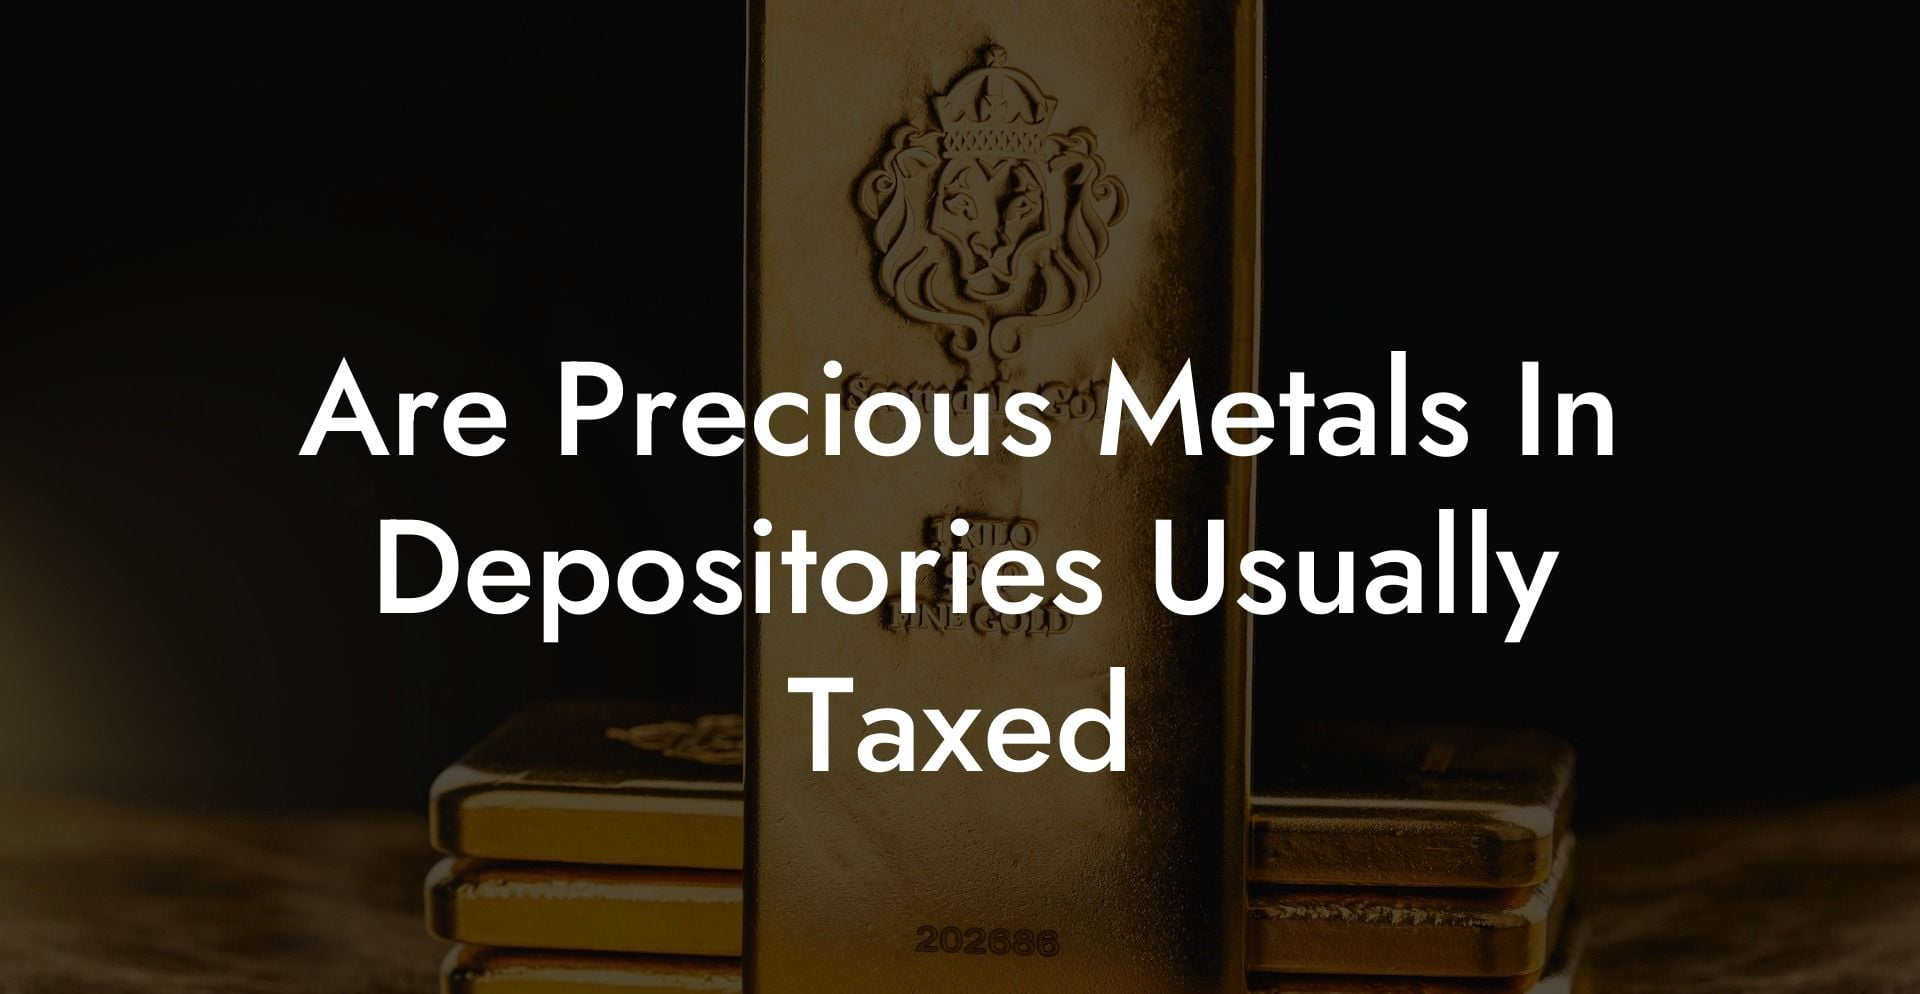 Are Precious Metals In Depositories Usually Taxed